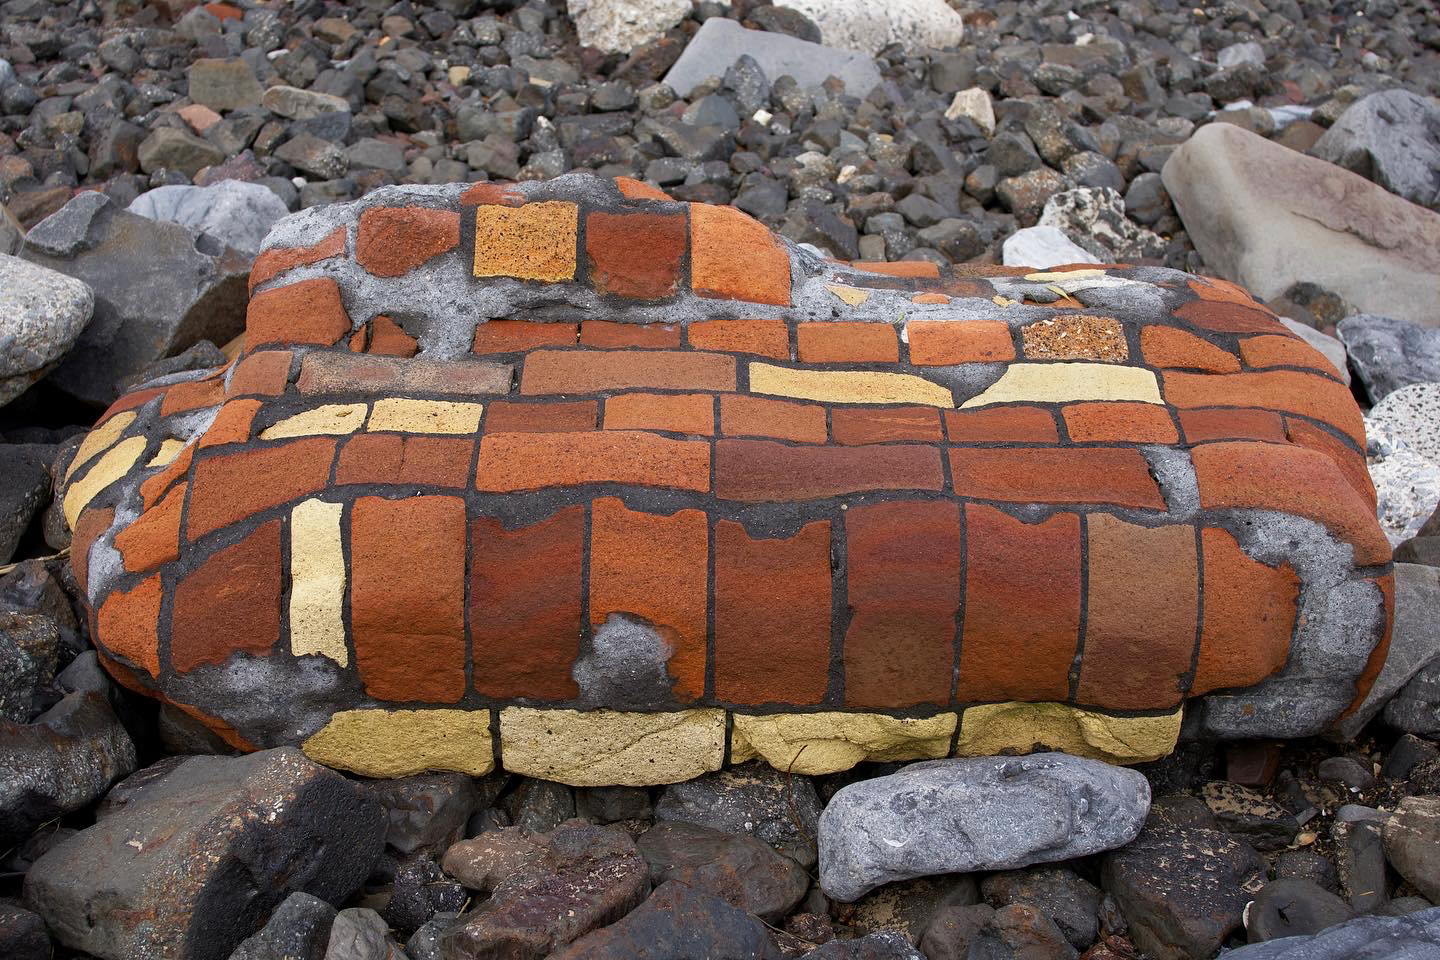 A rock that looks like a brick-pattern quilt